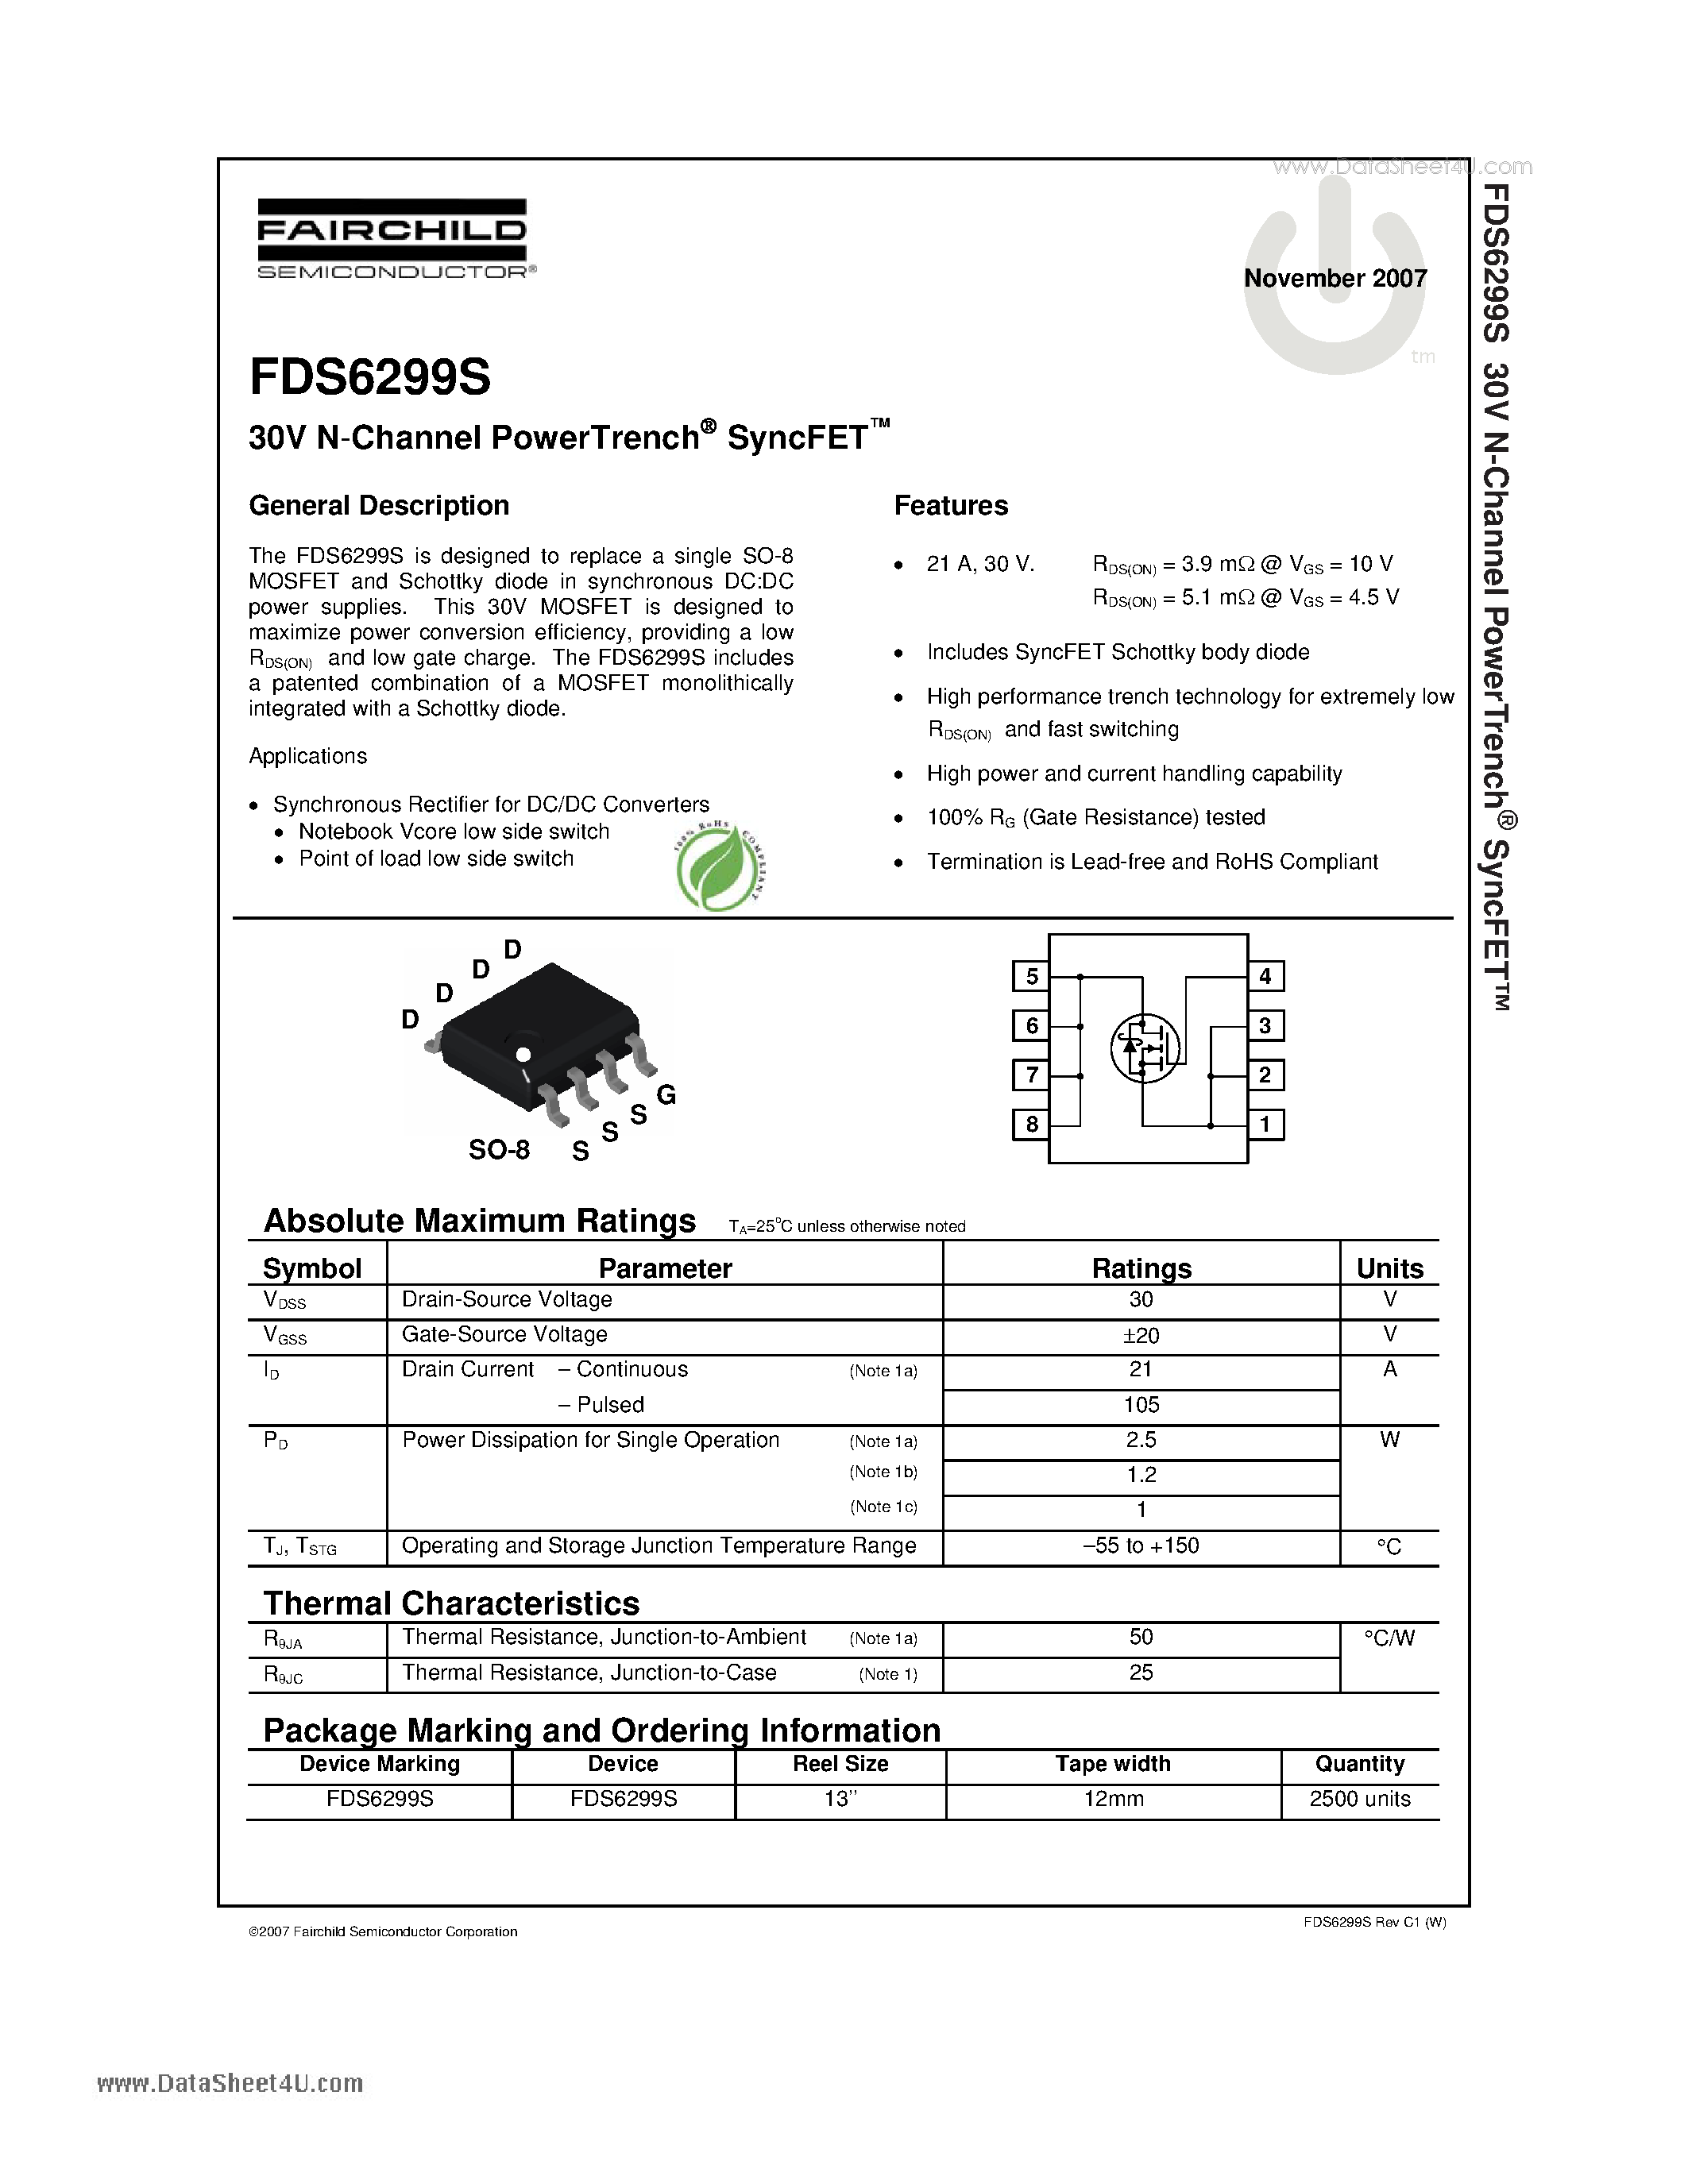 Datasheet FDS6299S - 30V N-Channel PowerTrench SyncFET page 1